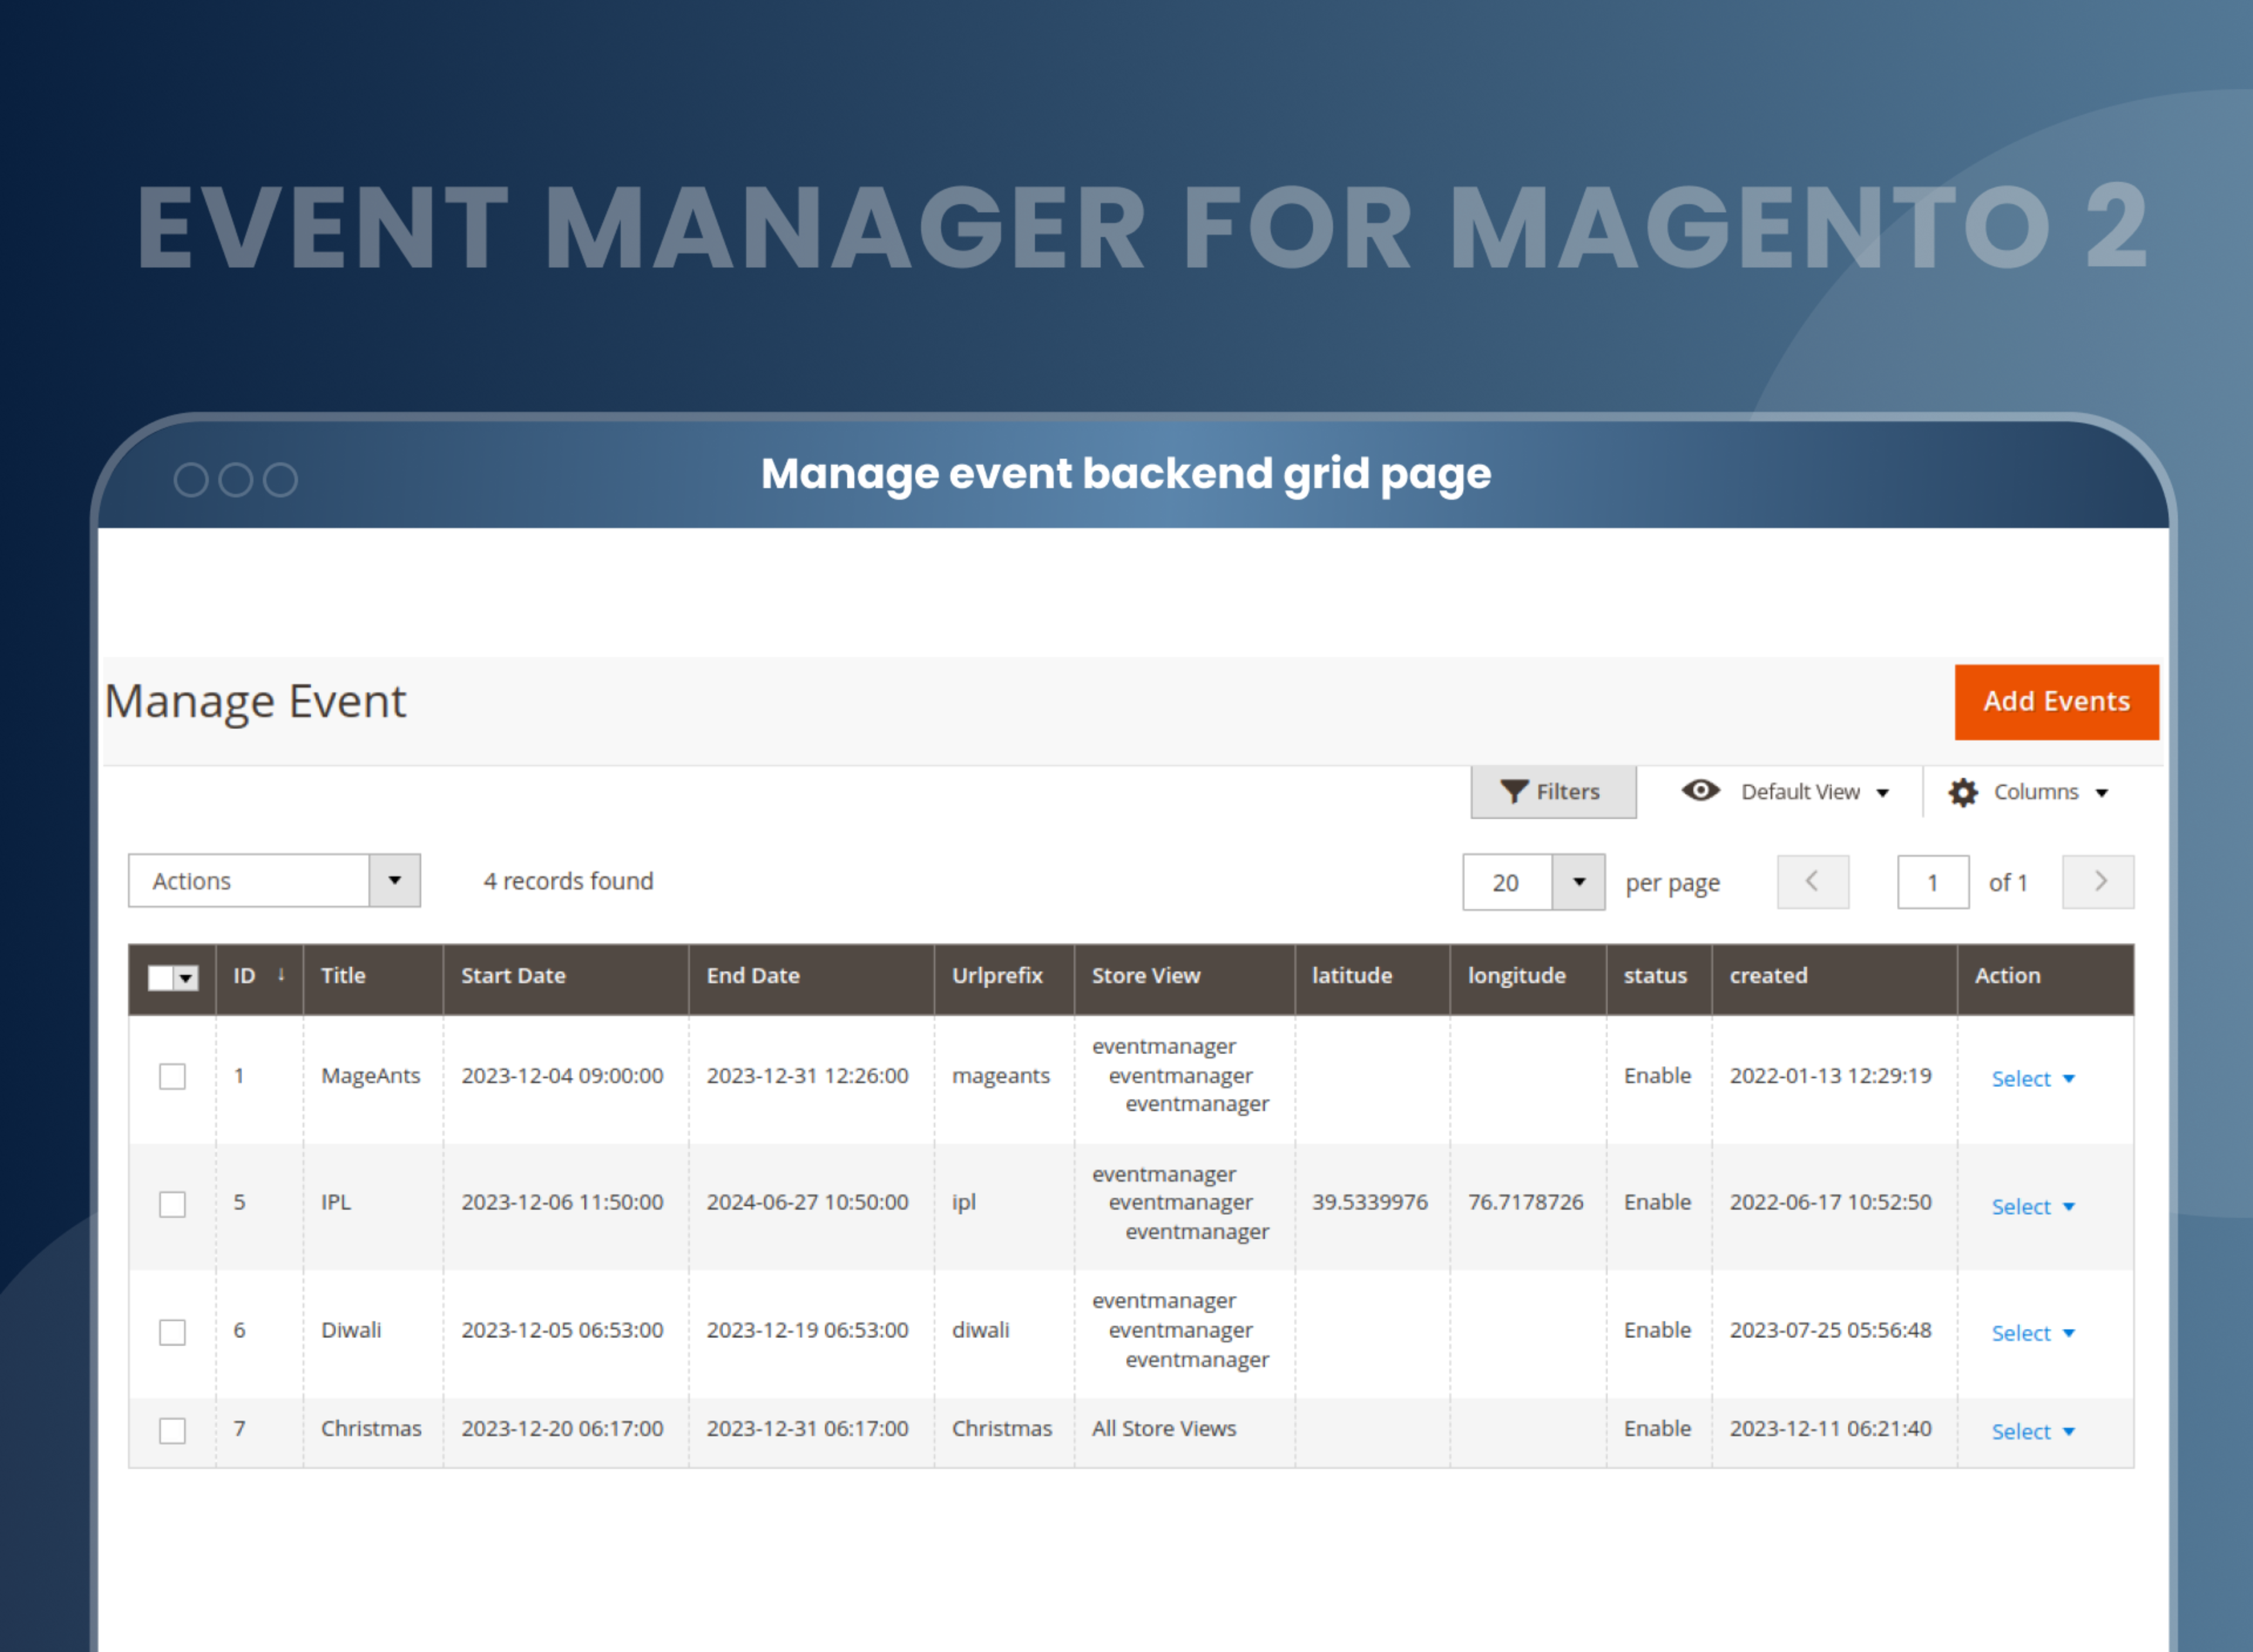 Manage event backend grid page